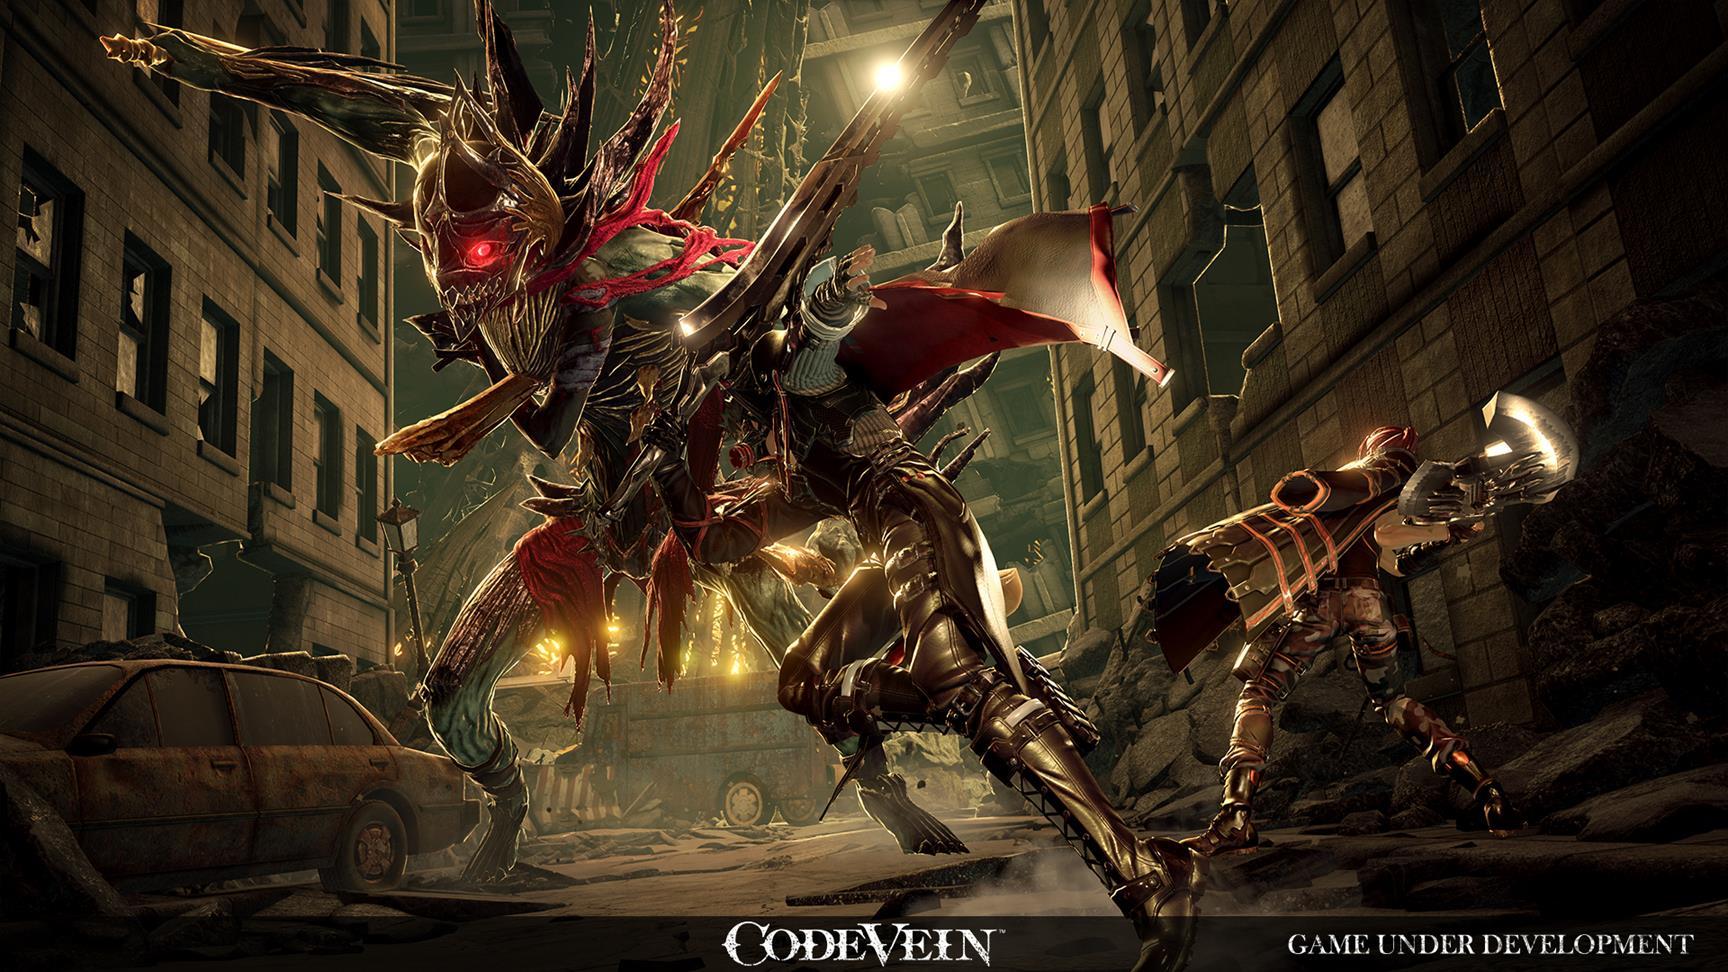 Here's 17 Minutes Of Code Vein Gameplay That's Very Souls Like